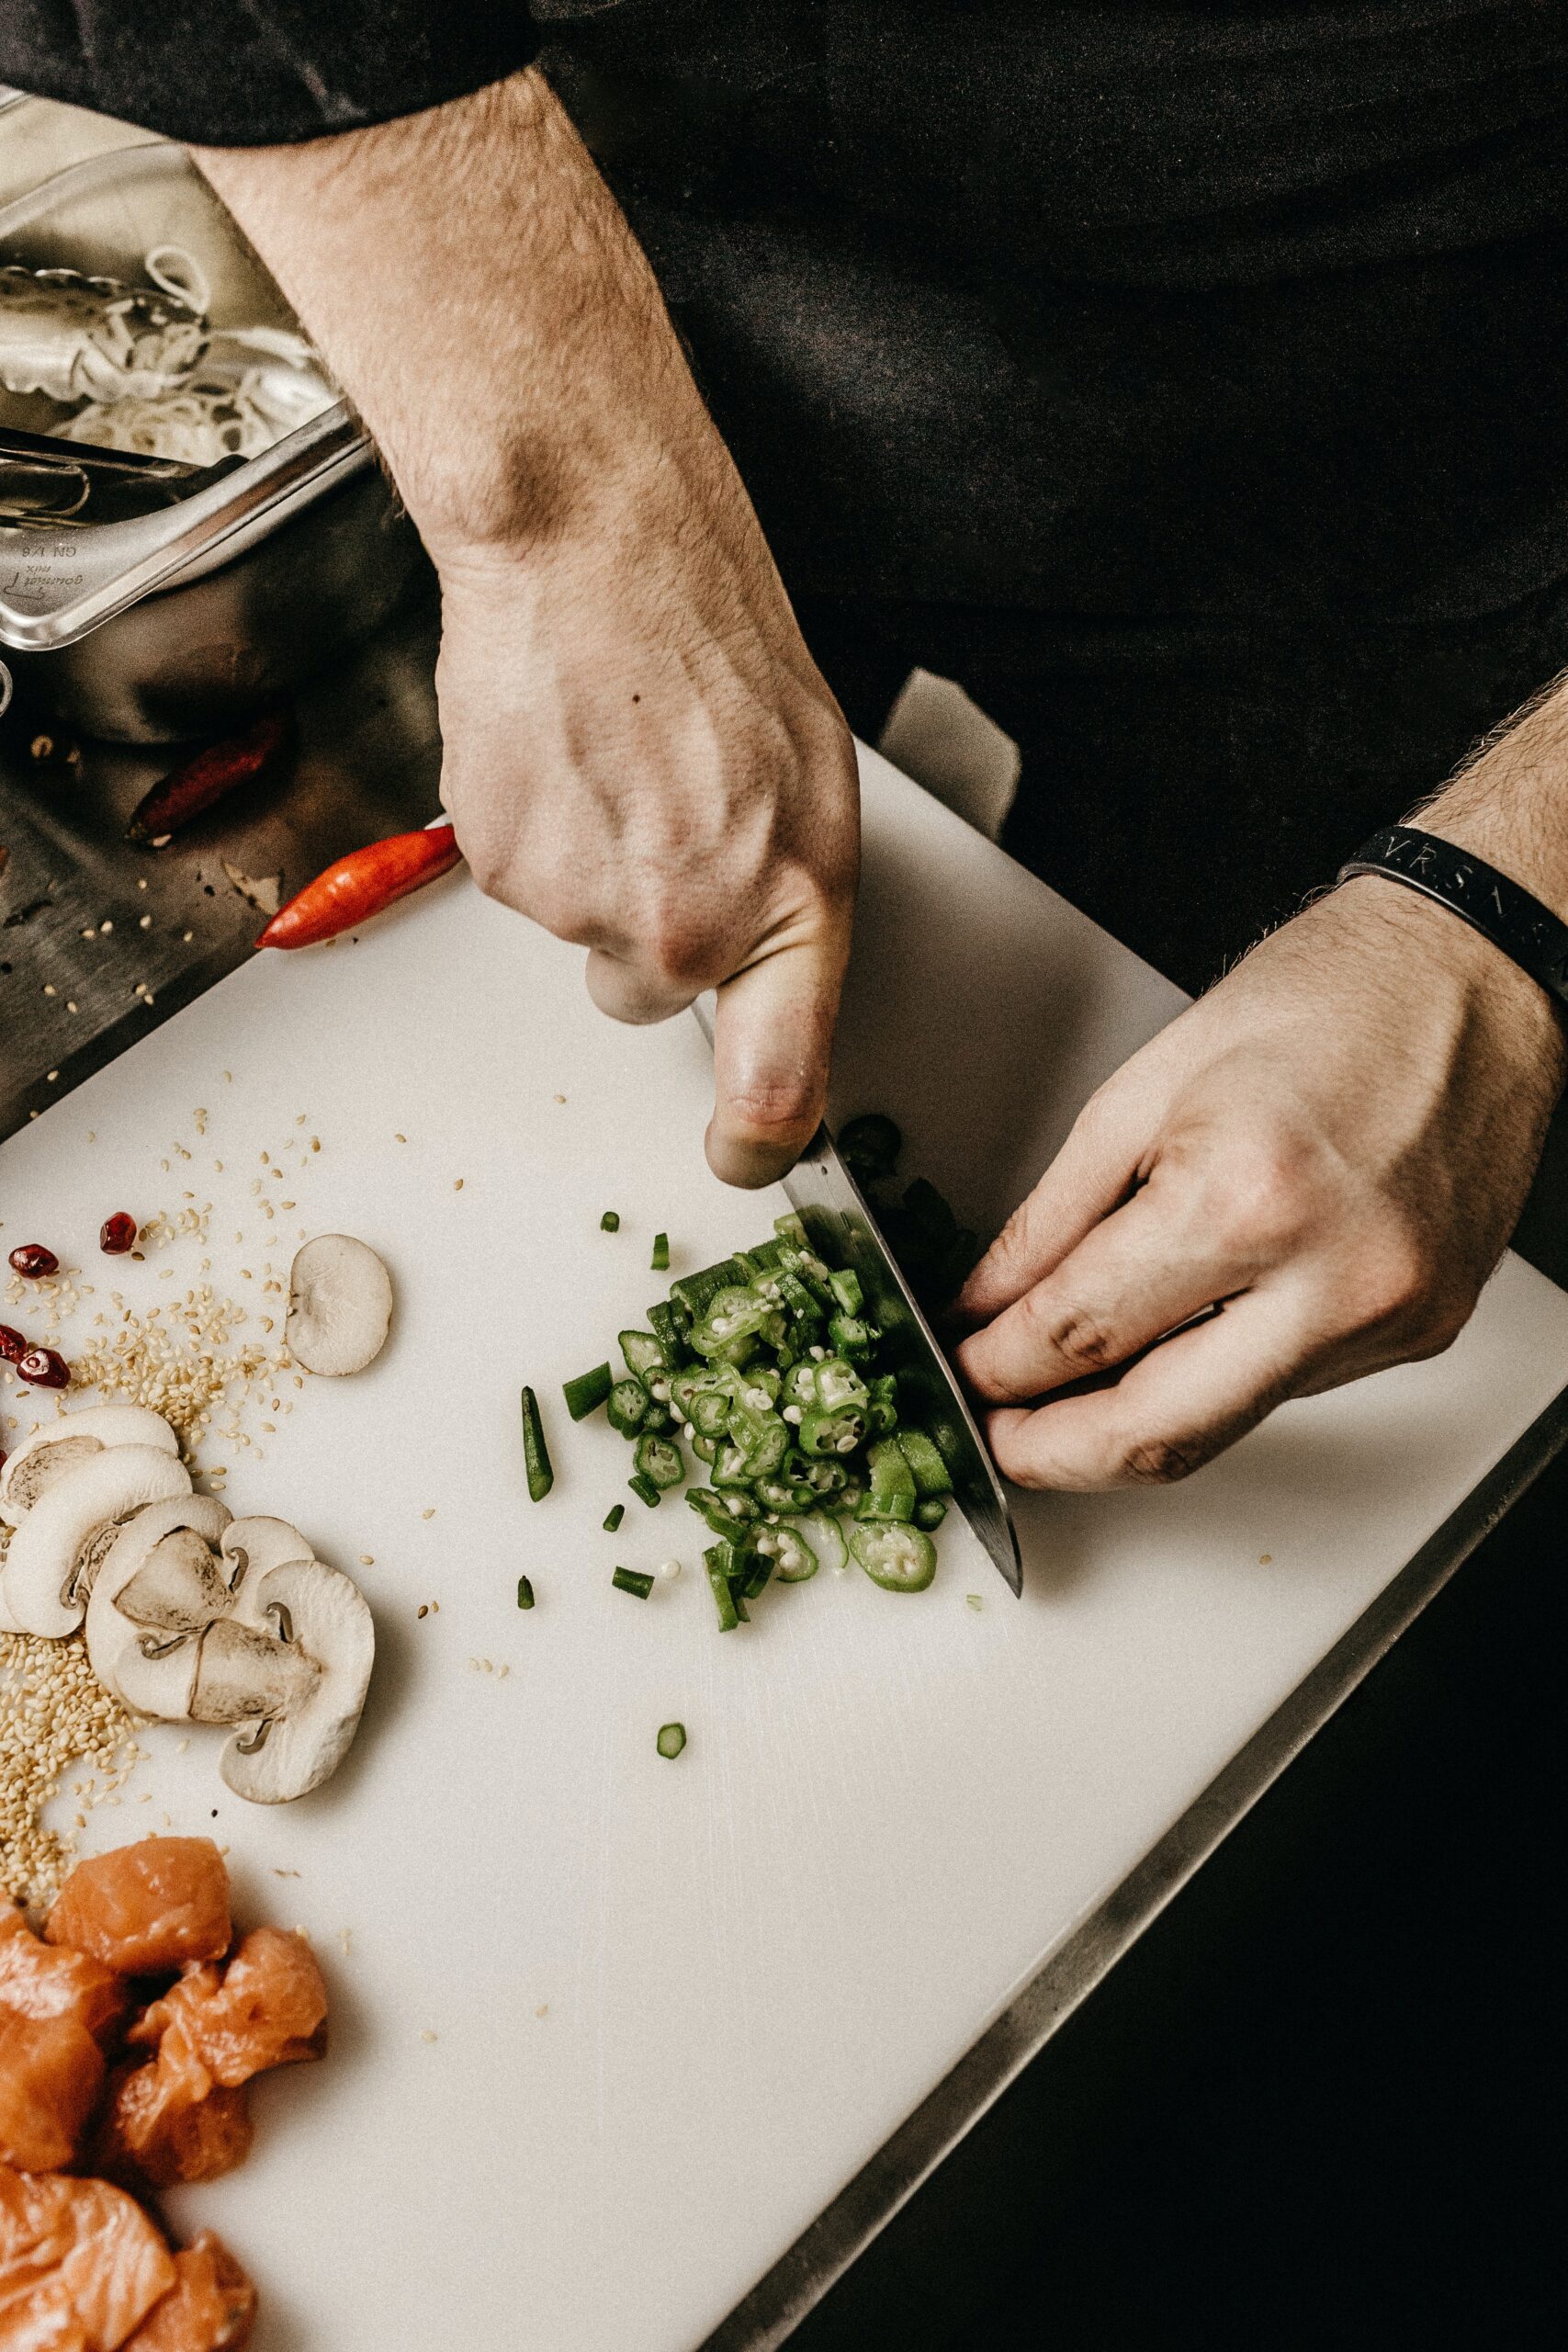 A chef's hands chopping vegetables